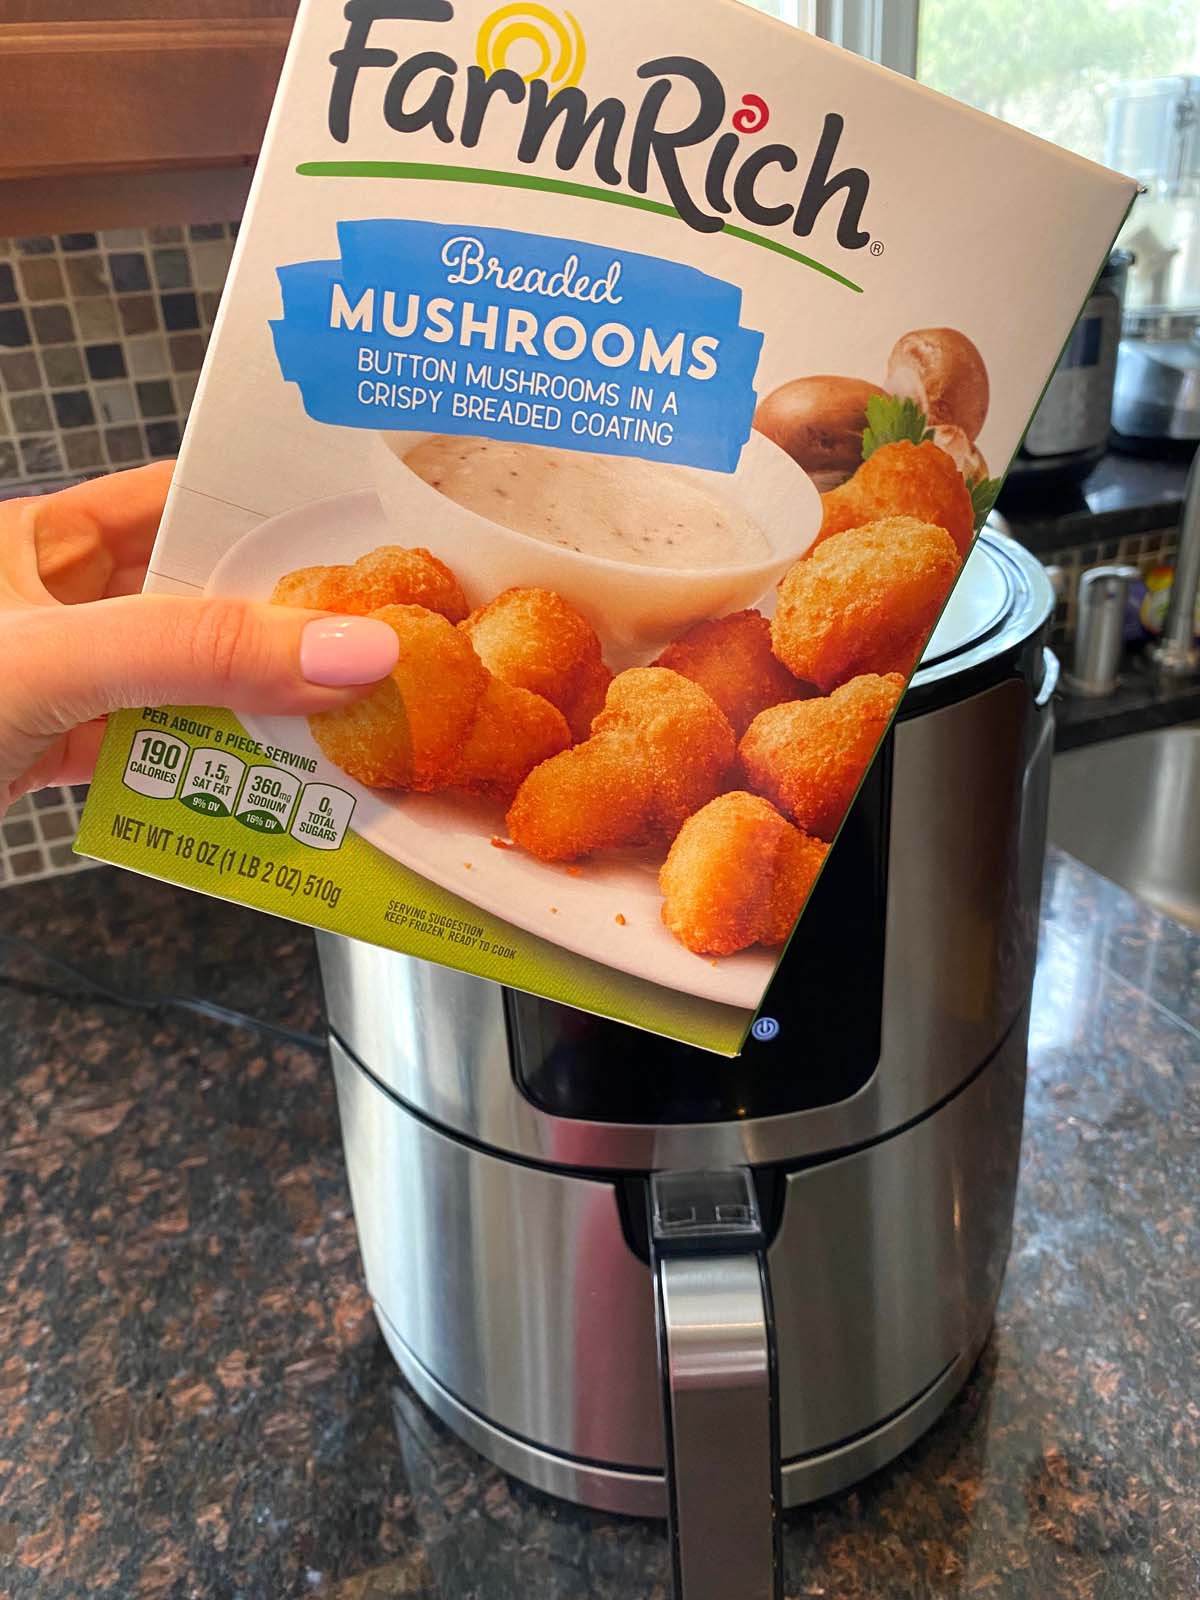 A box of frozen breaded mushrooms being held up in front of an air fryer.